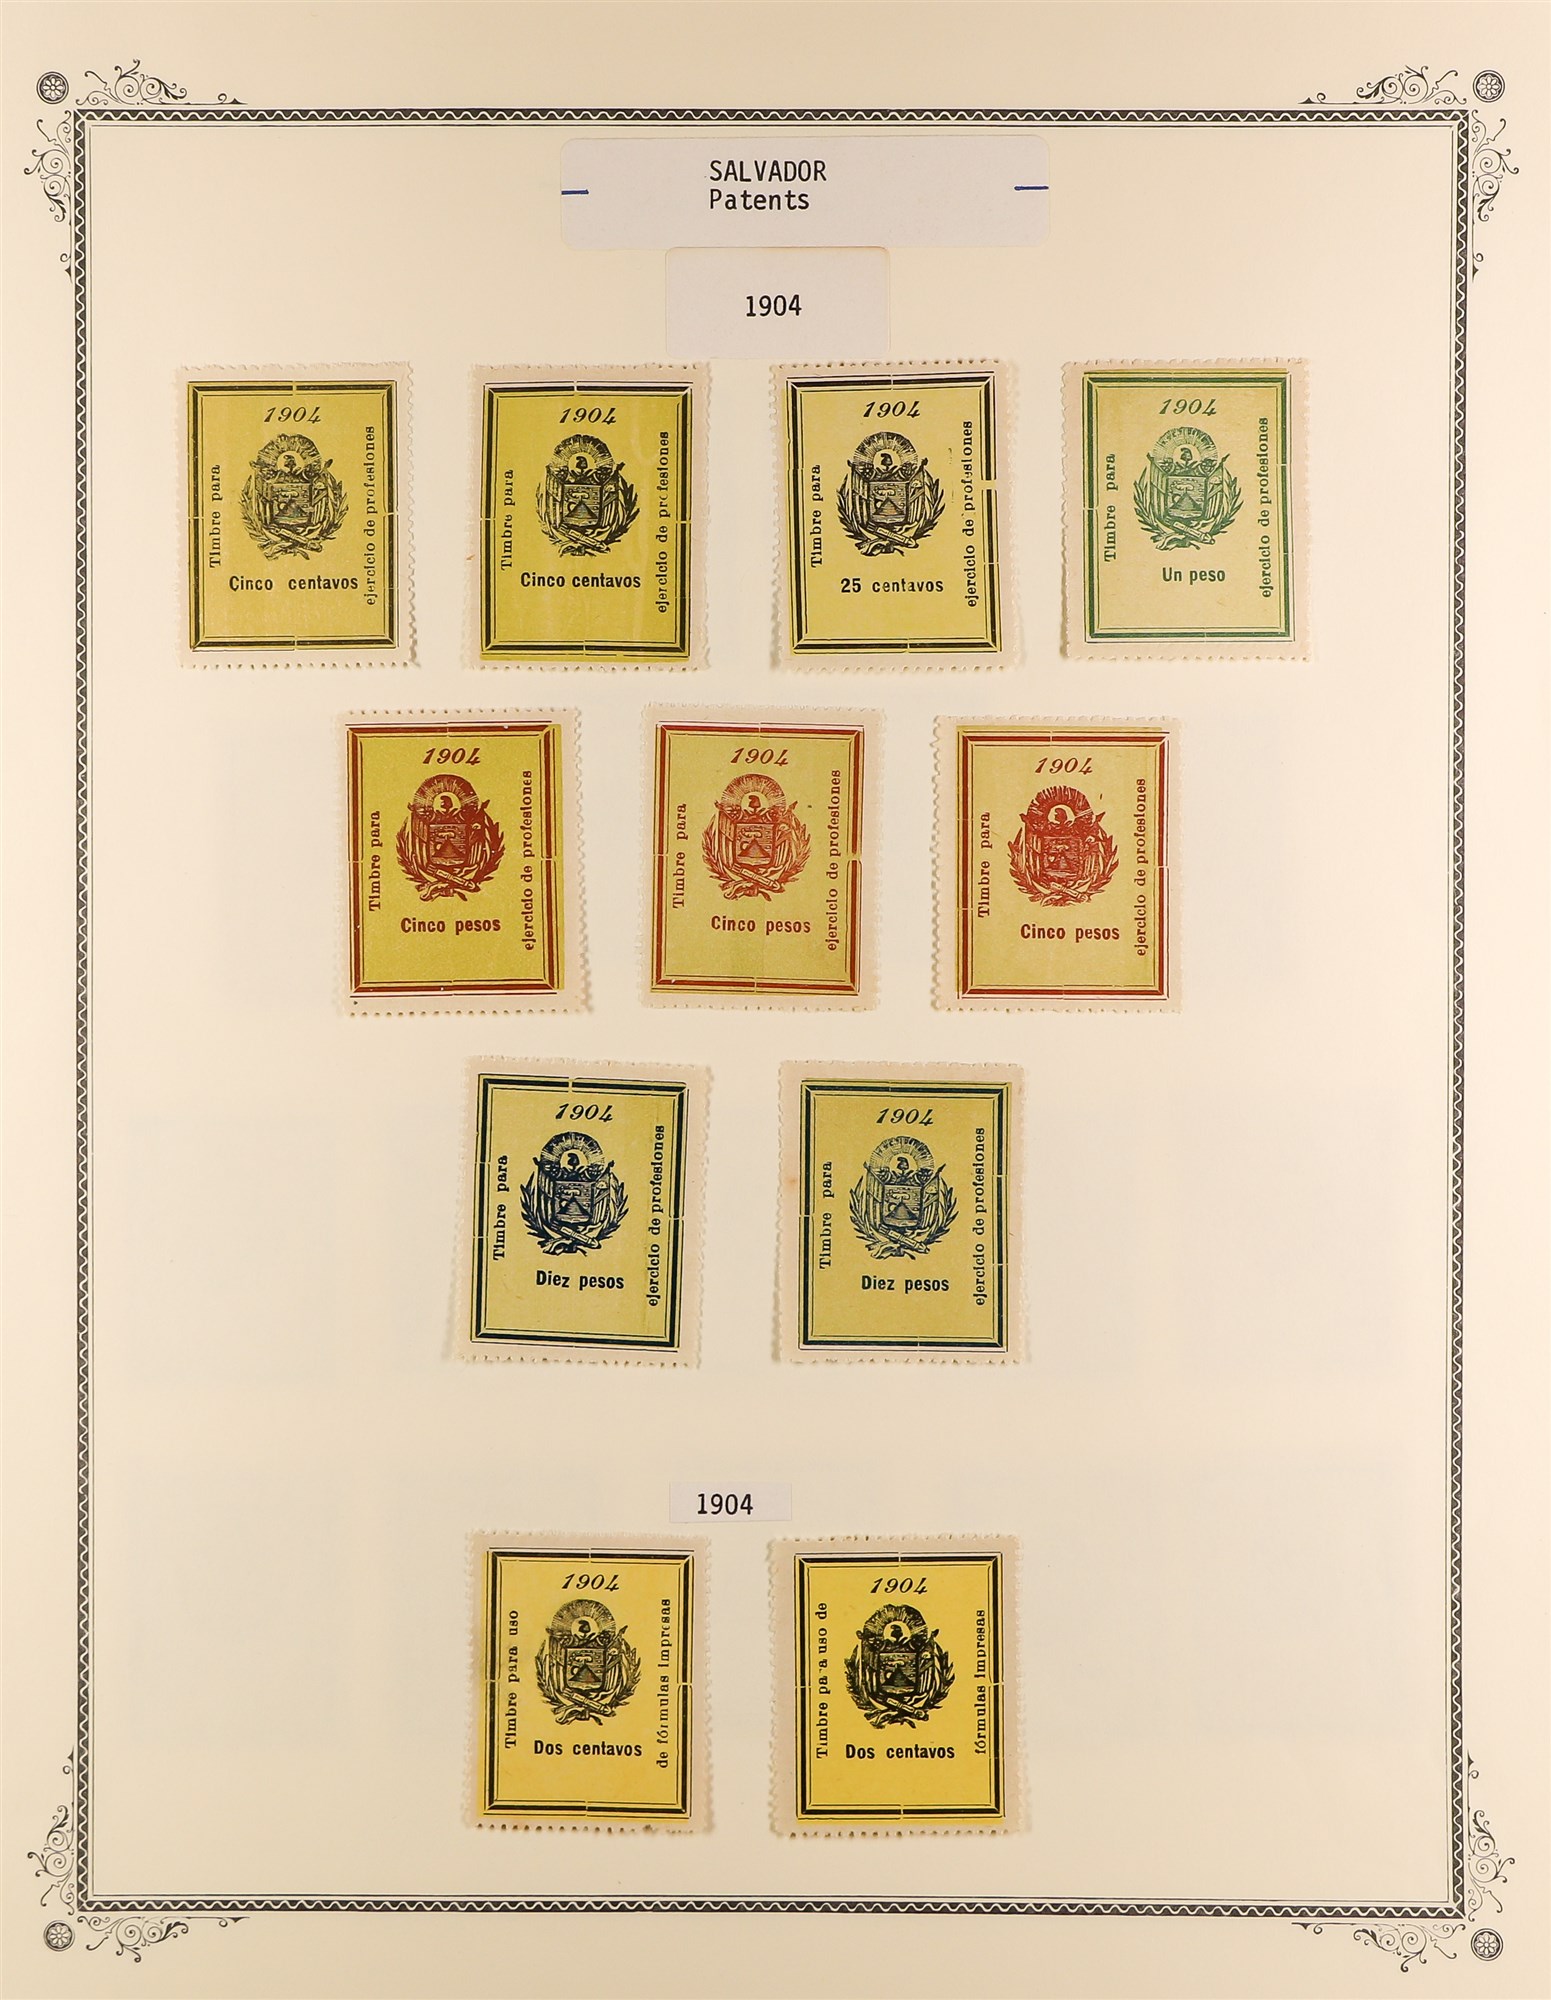 EL SALVADOR REVENUE STAMPS 1883 - 1925 mint & used collection of over 400 revenue stamps, on album - Image 4 of 27